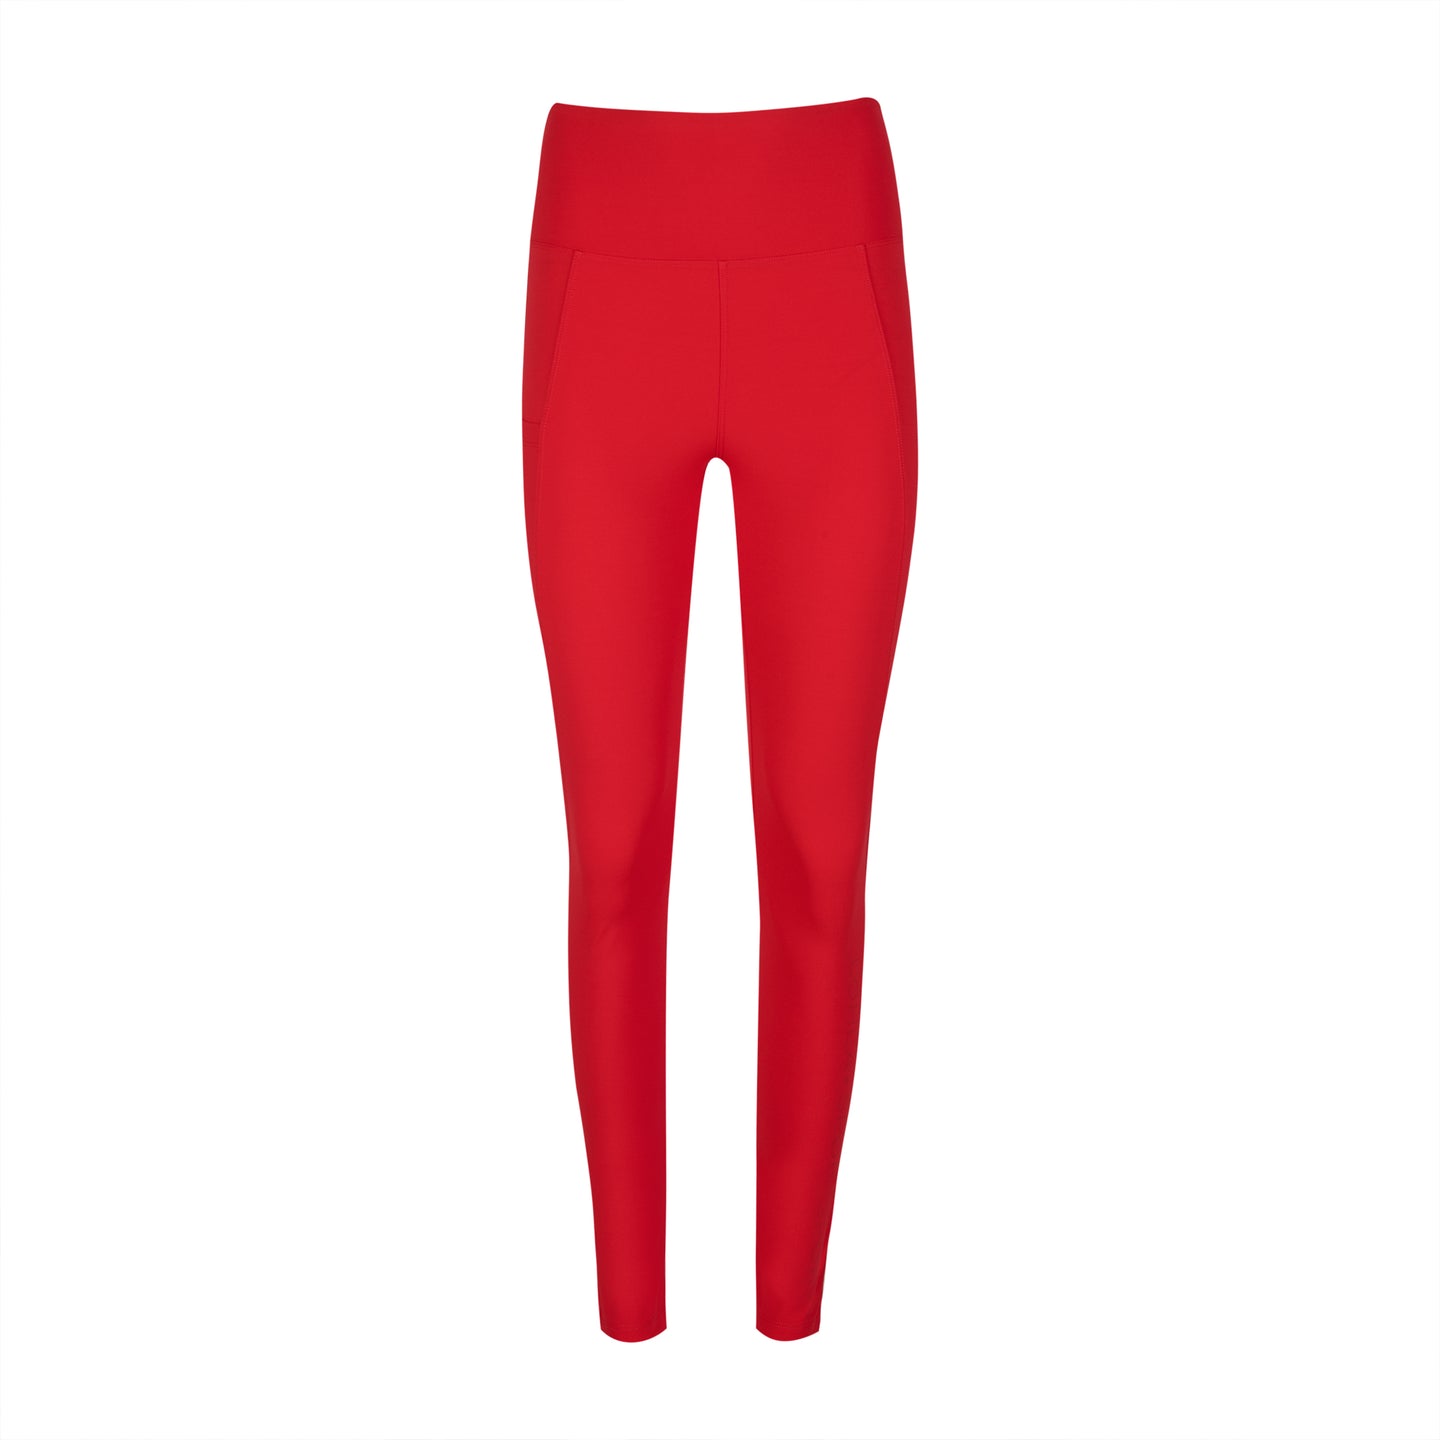 The Golf Fitness Pull-On Pant